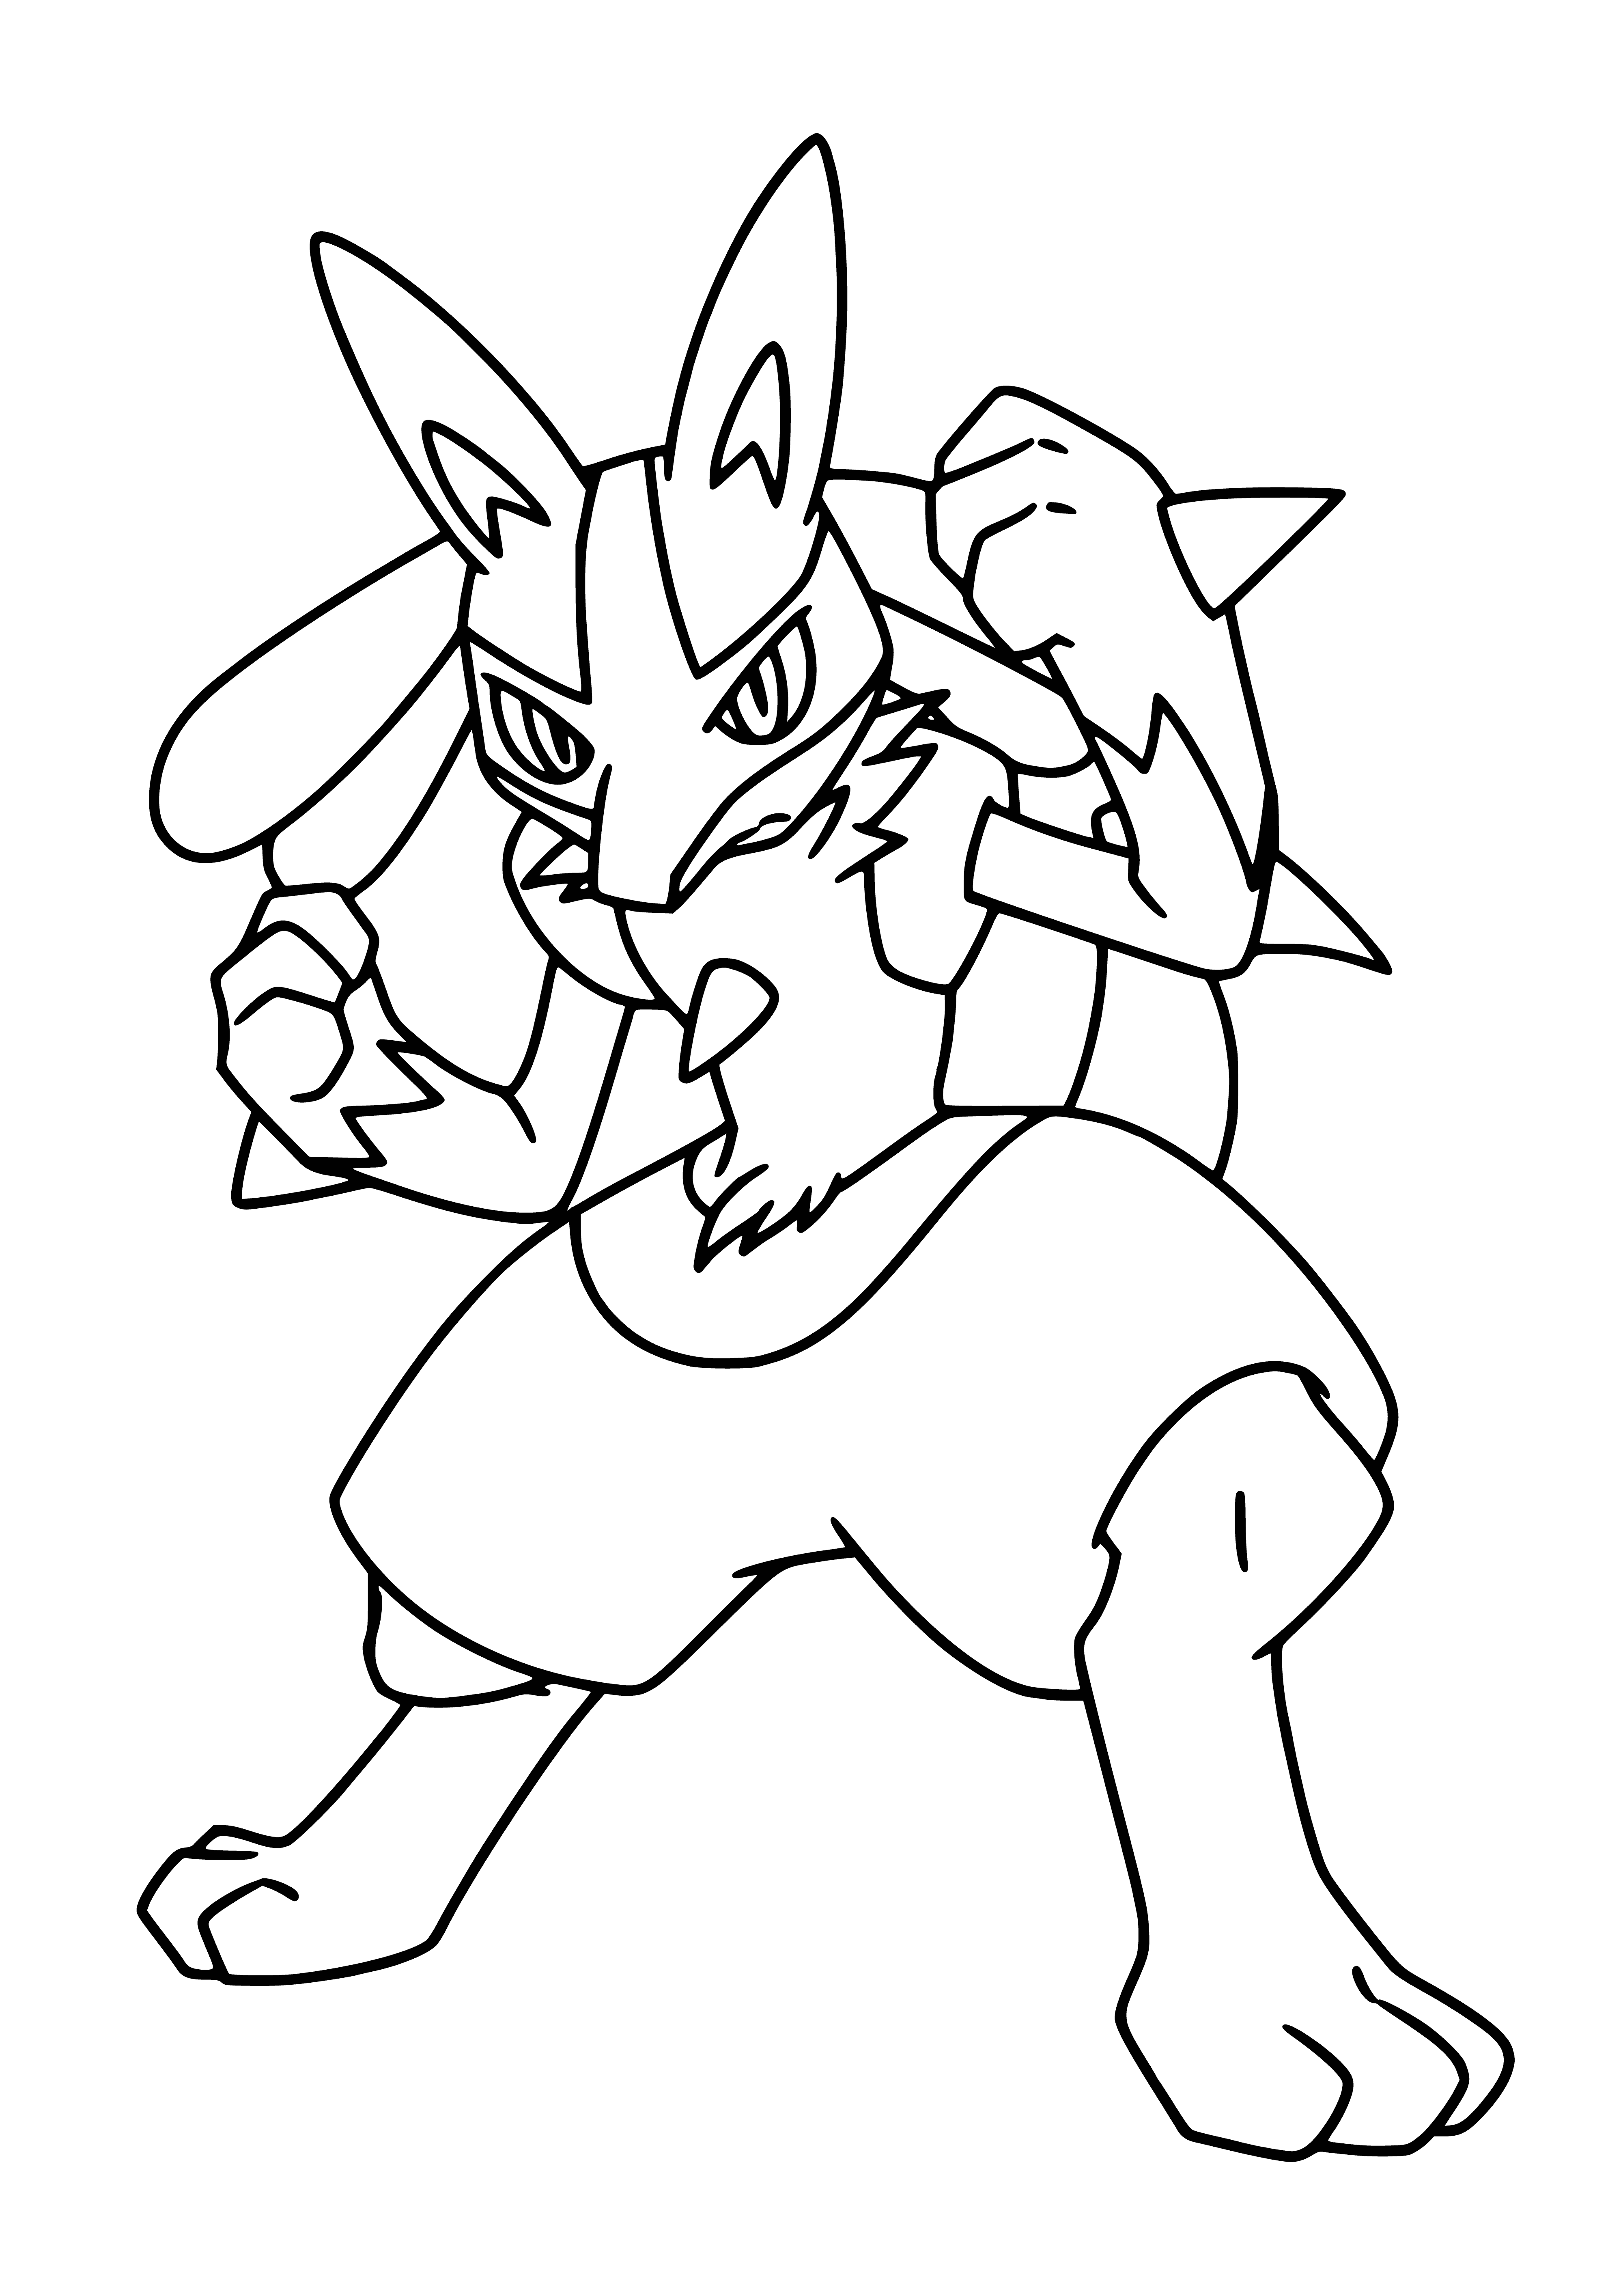 coloring page: Lucario is a bipedal Pokémon w/ blue & black fur. It can understand humans, has psychic powers, & knows attacks like Aura Sphere & Close Combat. When fighting, its fur glows yellow. Evolves from Riolu.